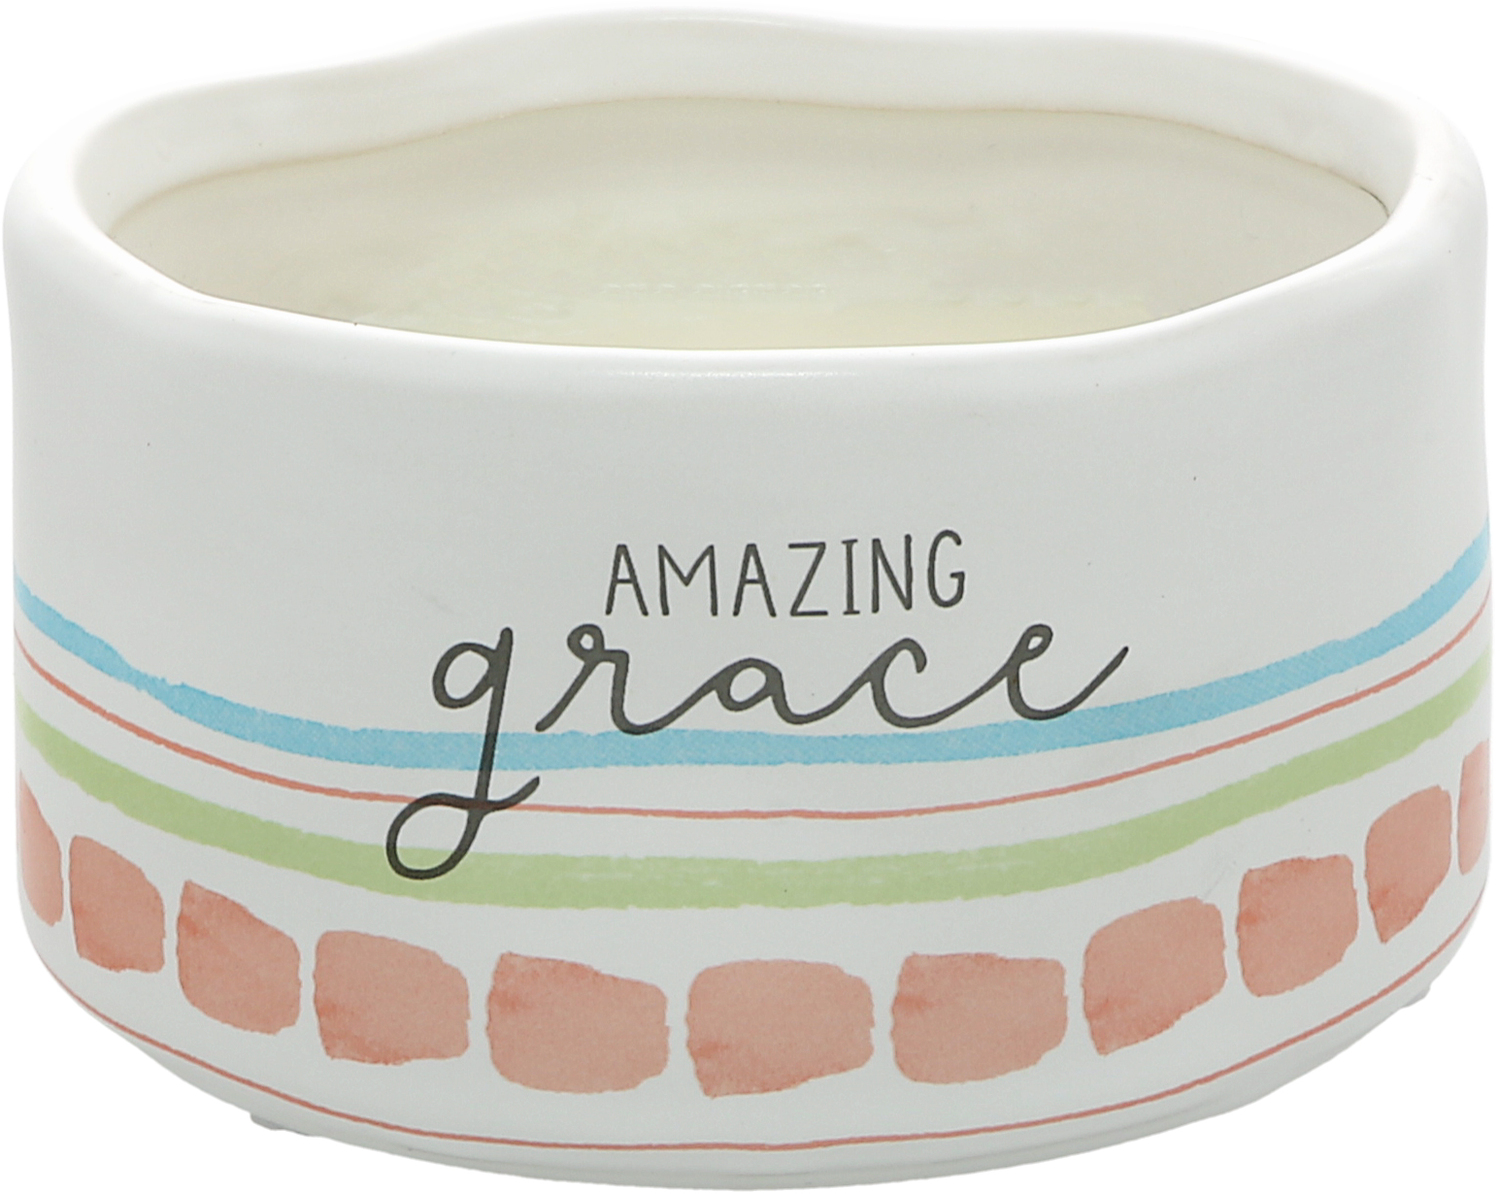 Amazing Grace by Graceful Love -BCB - Amazing Grace - 8 oz - 100% Soy Wax Reveal Candle
Scent: Tranquility